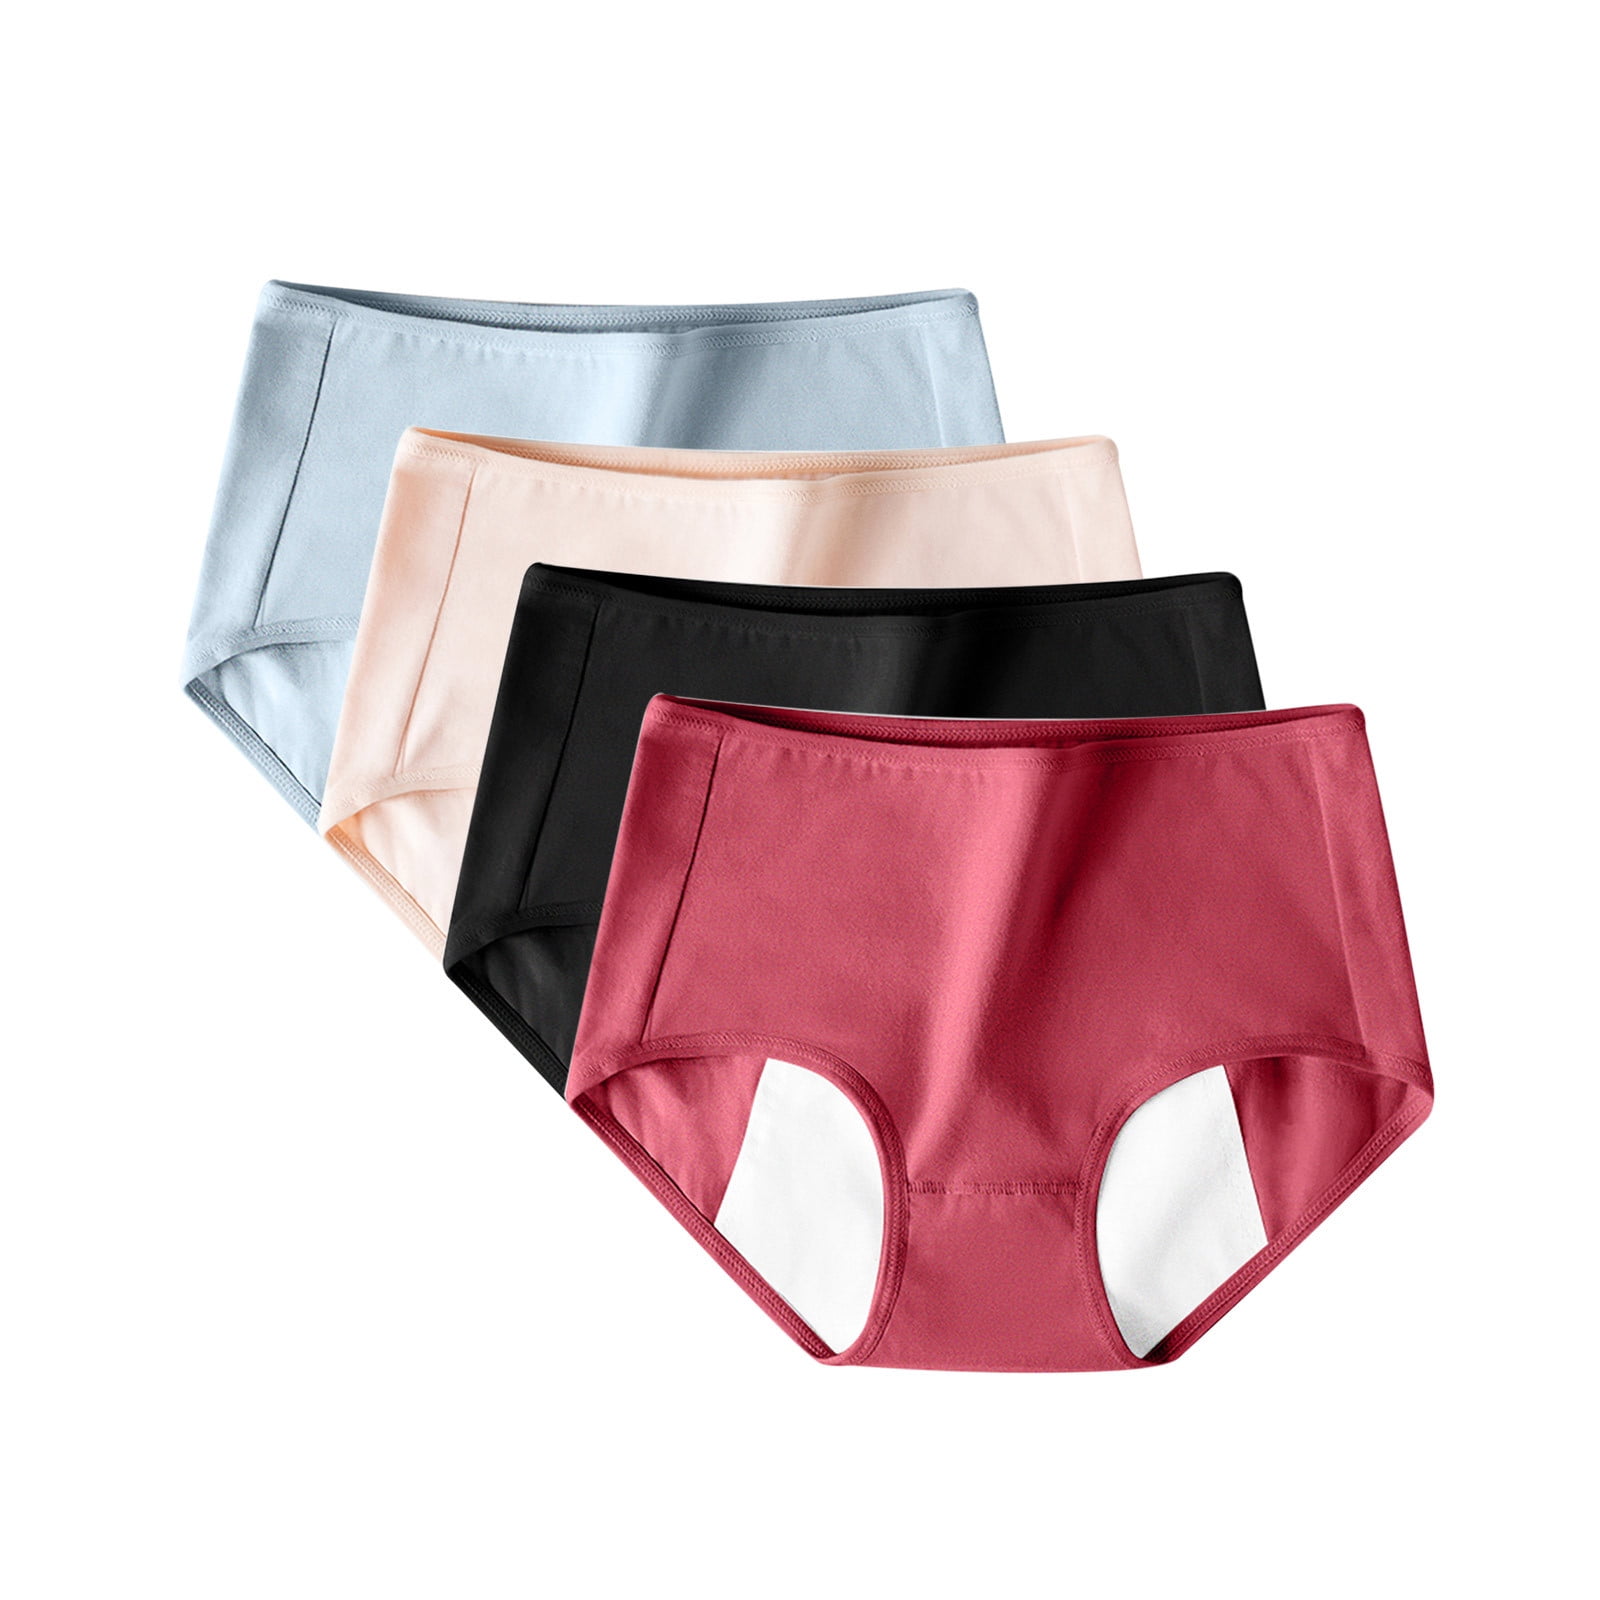 Details about   Pack of 5 Womens Menstrual Period Underwear Cotton Leakproof Panties Briefs